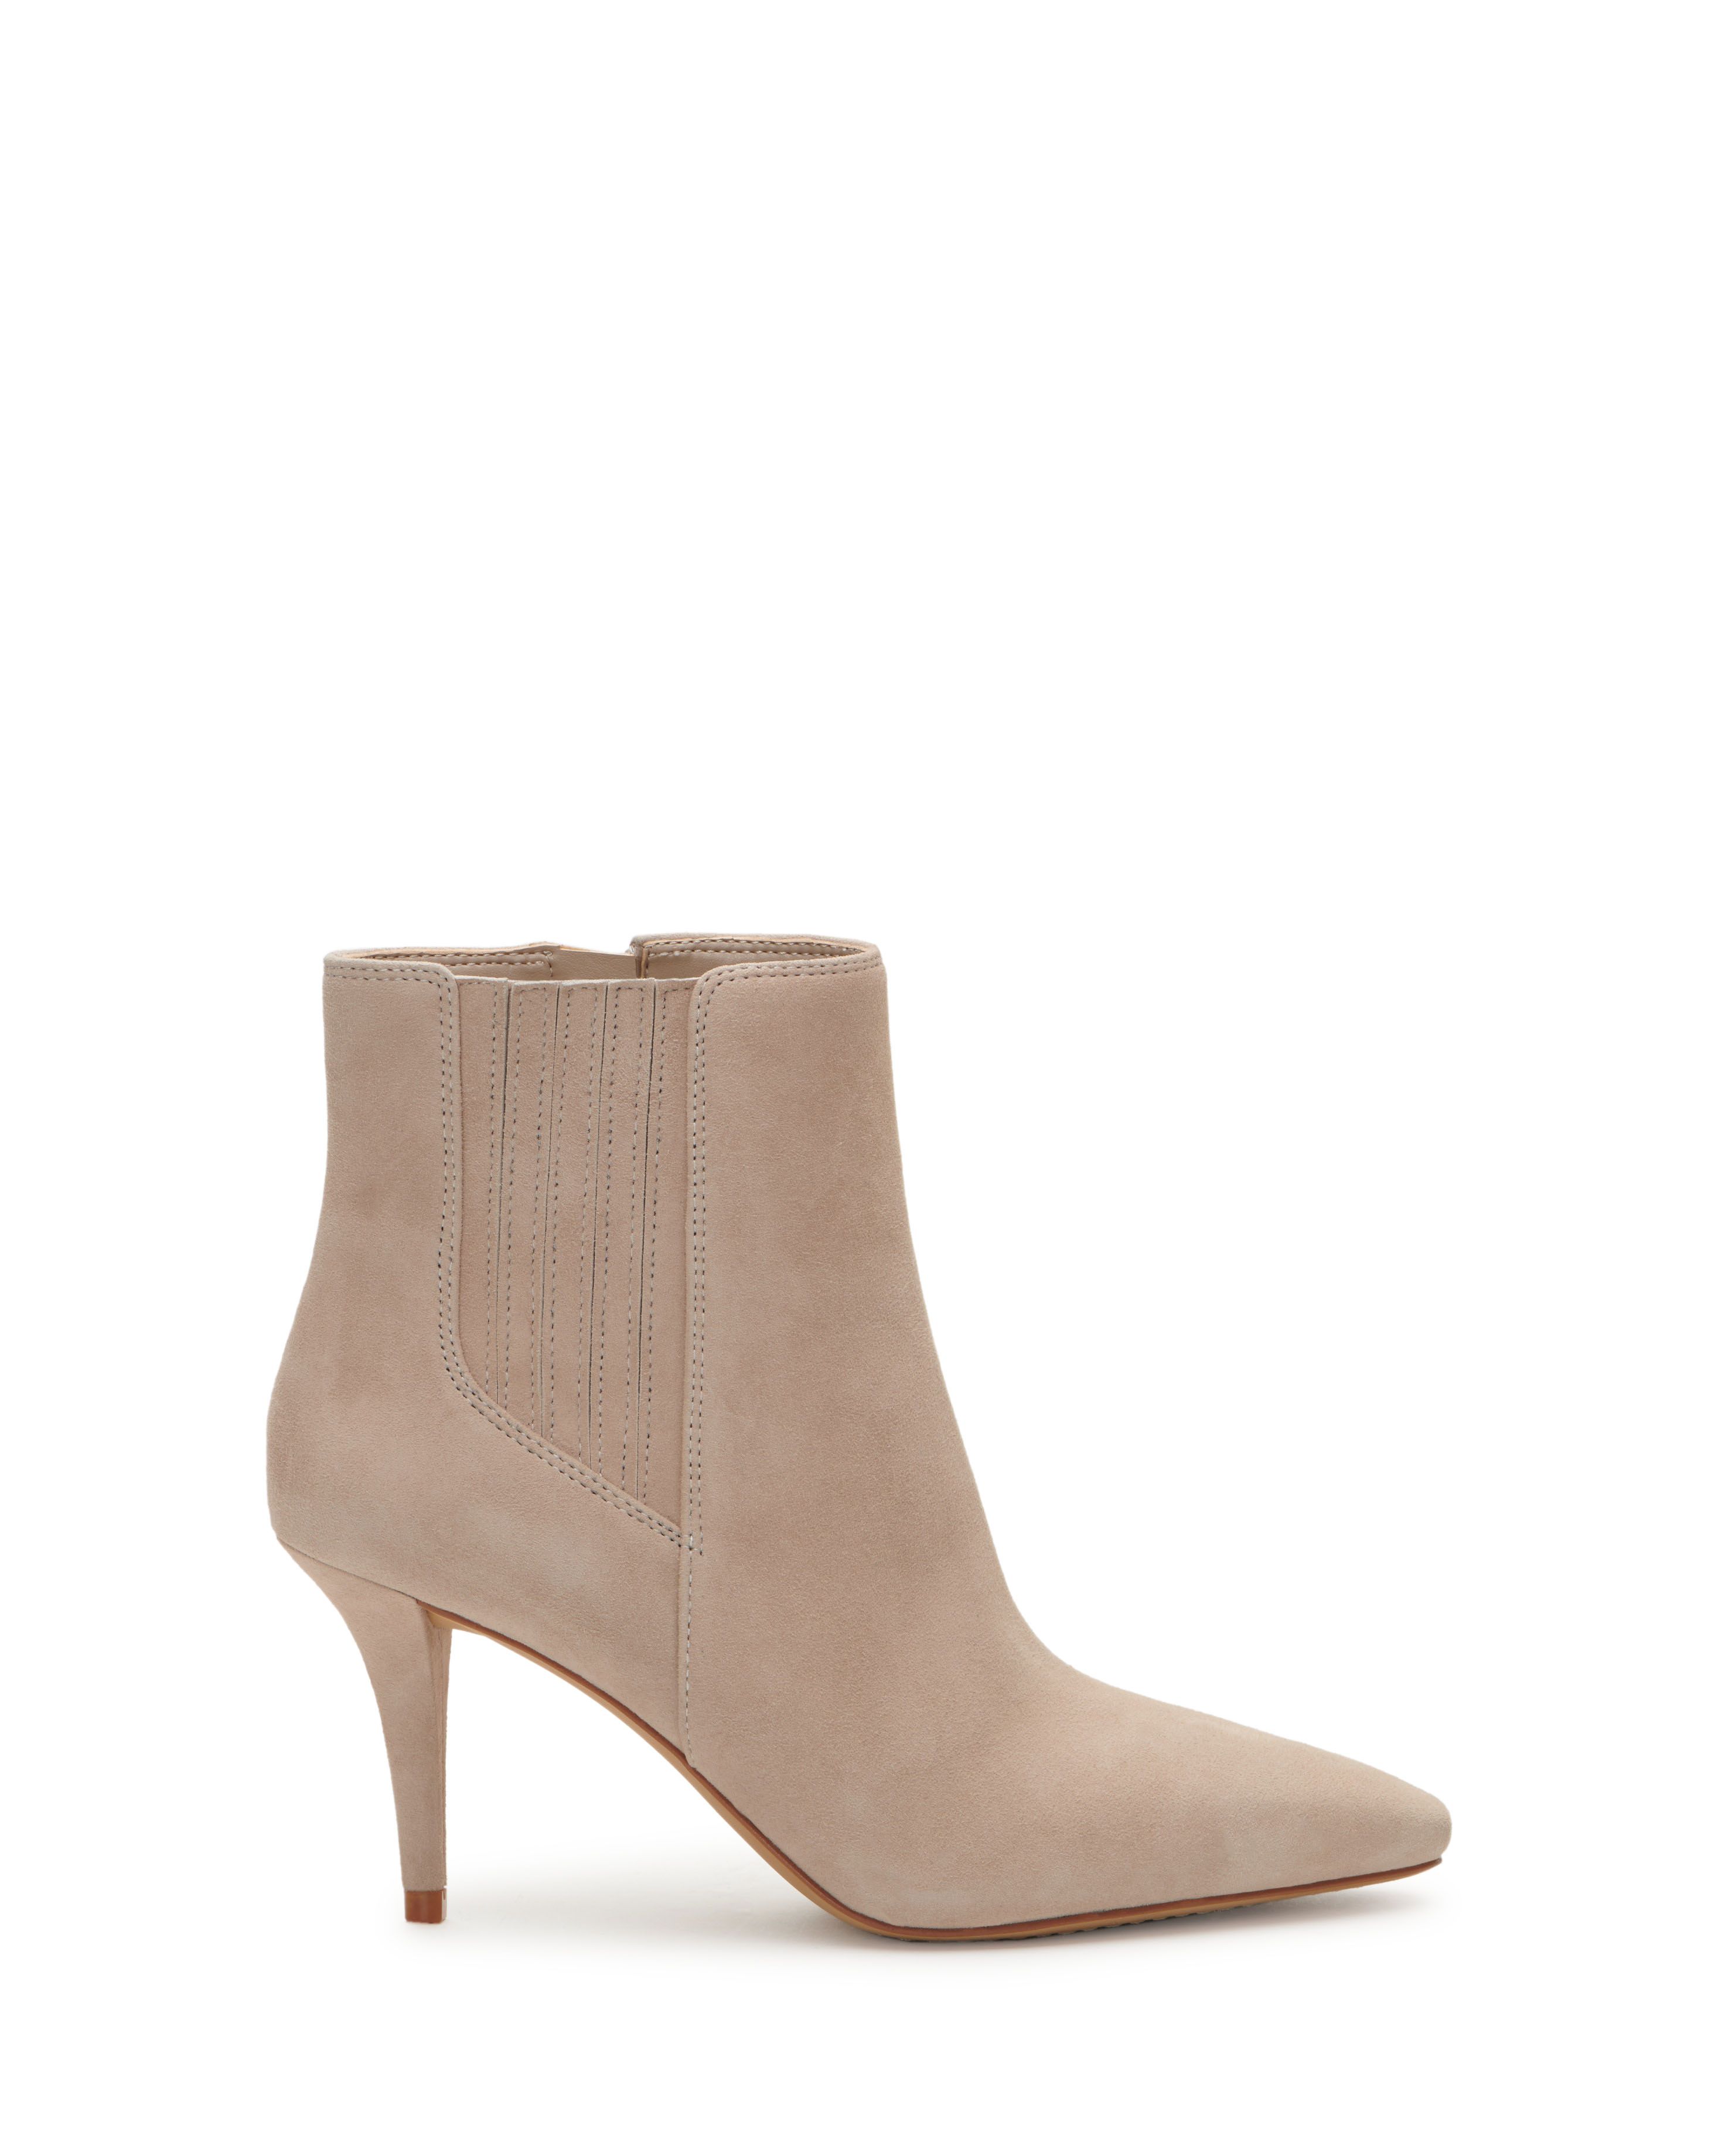 Vince Camuto Ambind Bootie | Vince Camuto